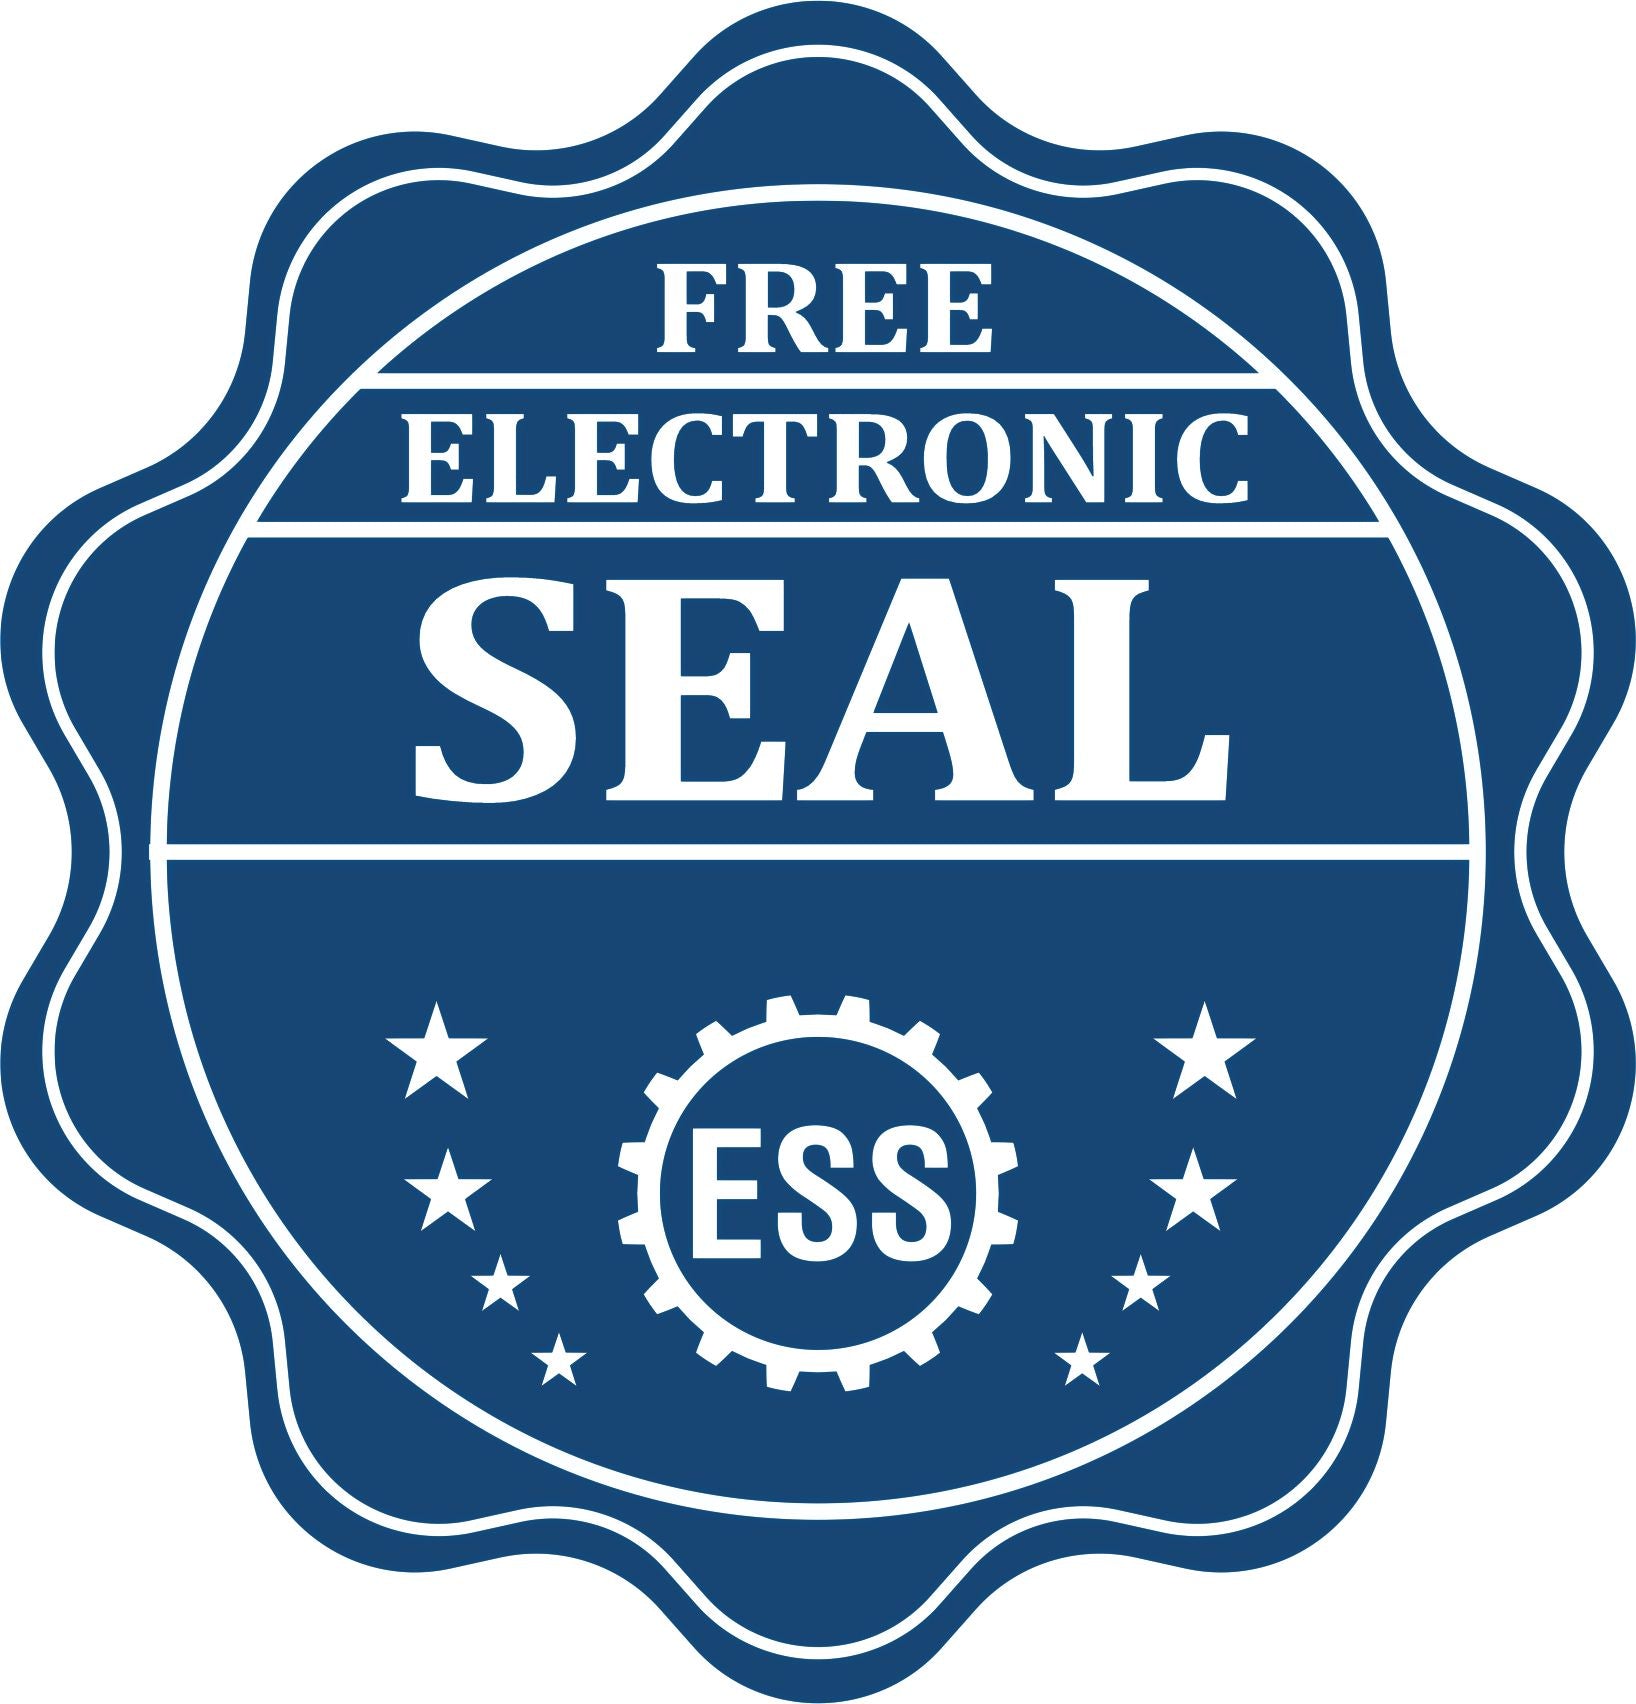 A badge showing a free electronic seal for the Heavy Duty Cast Iron Colorado Engineer Seal Embosser with stars and the ESS gear on the emblem.